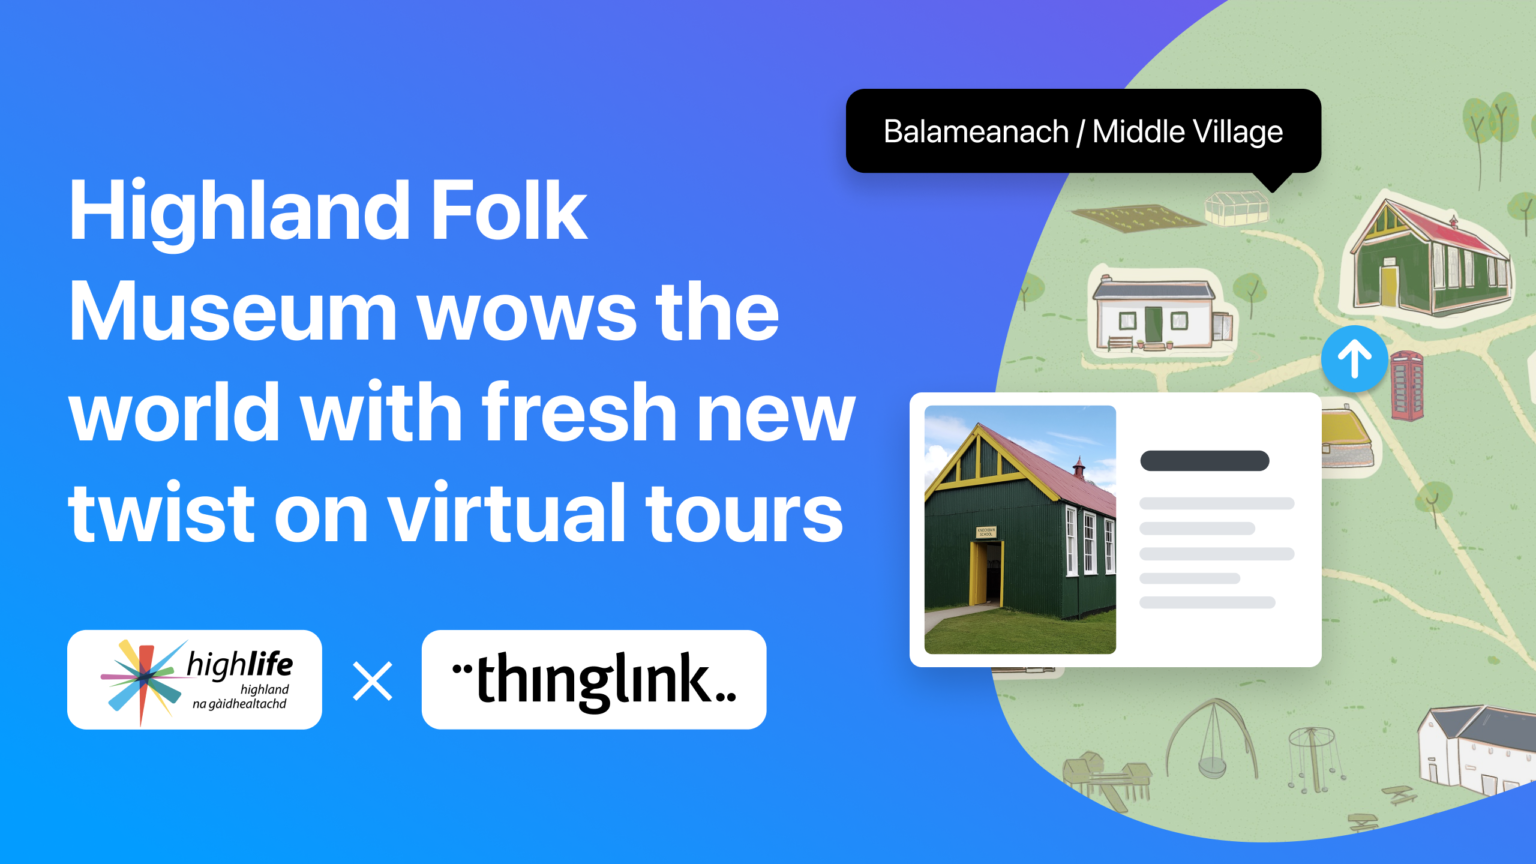 HIghland Folk Museum wows the world with fresh new twist on virtual tours